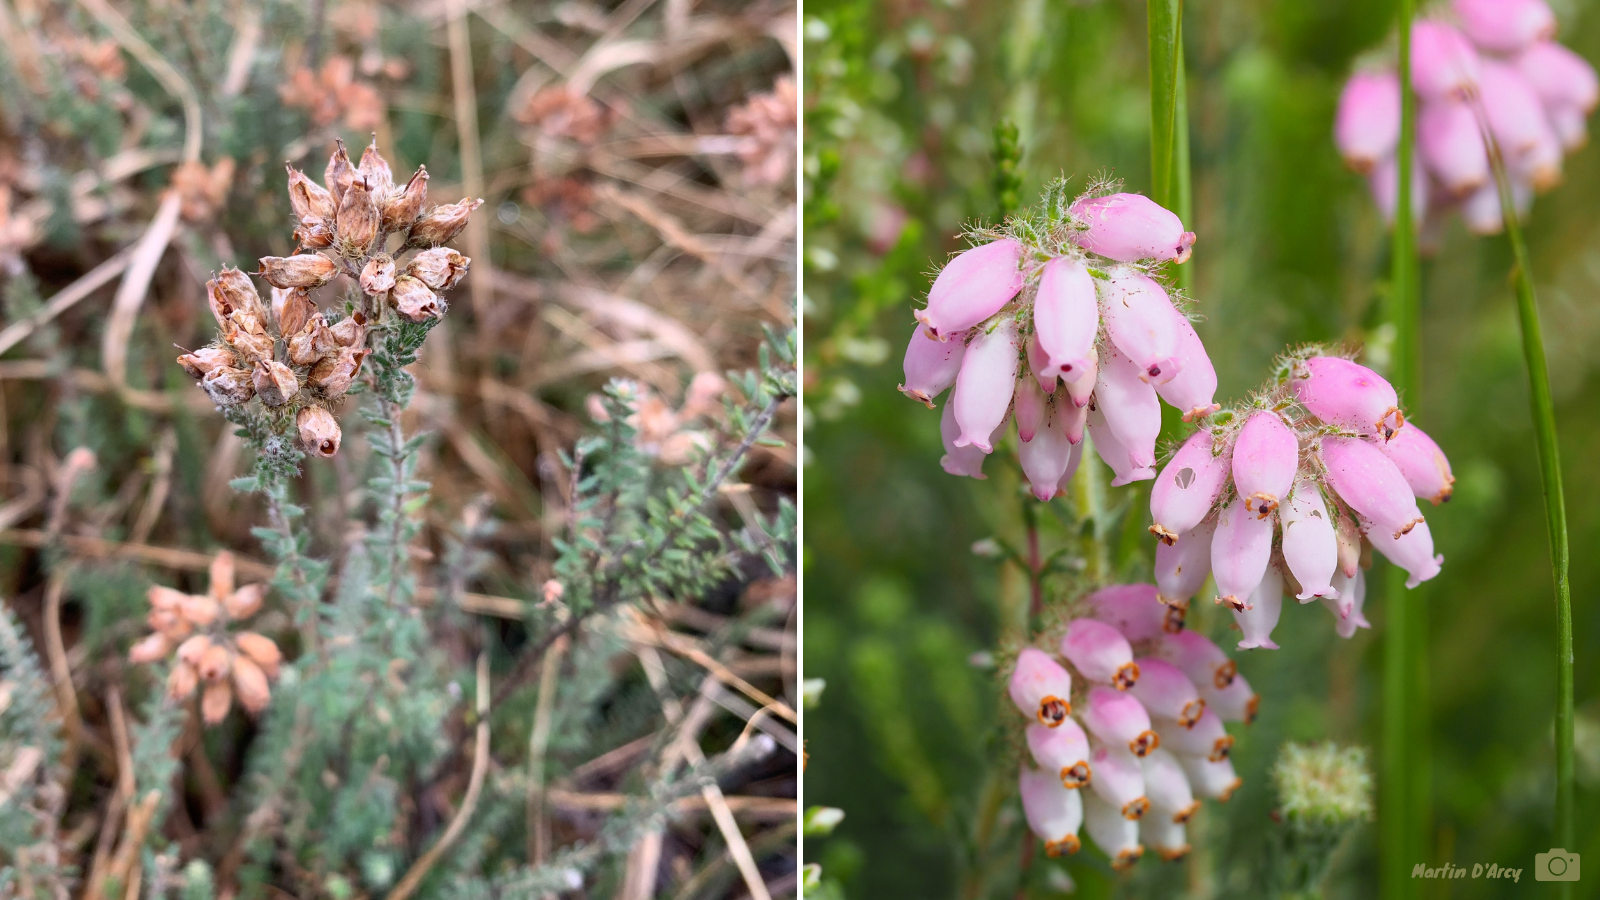 Two photos of Cross-leaved Heath. On the left in winter, with dry flower heads. On the right in summer, with clusters of soft pink flowers.